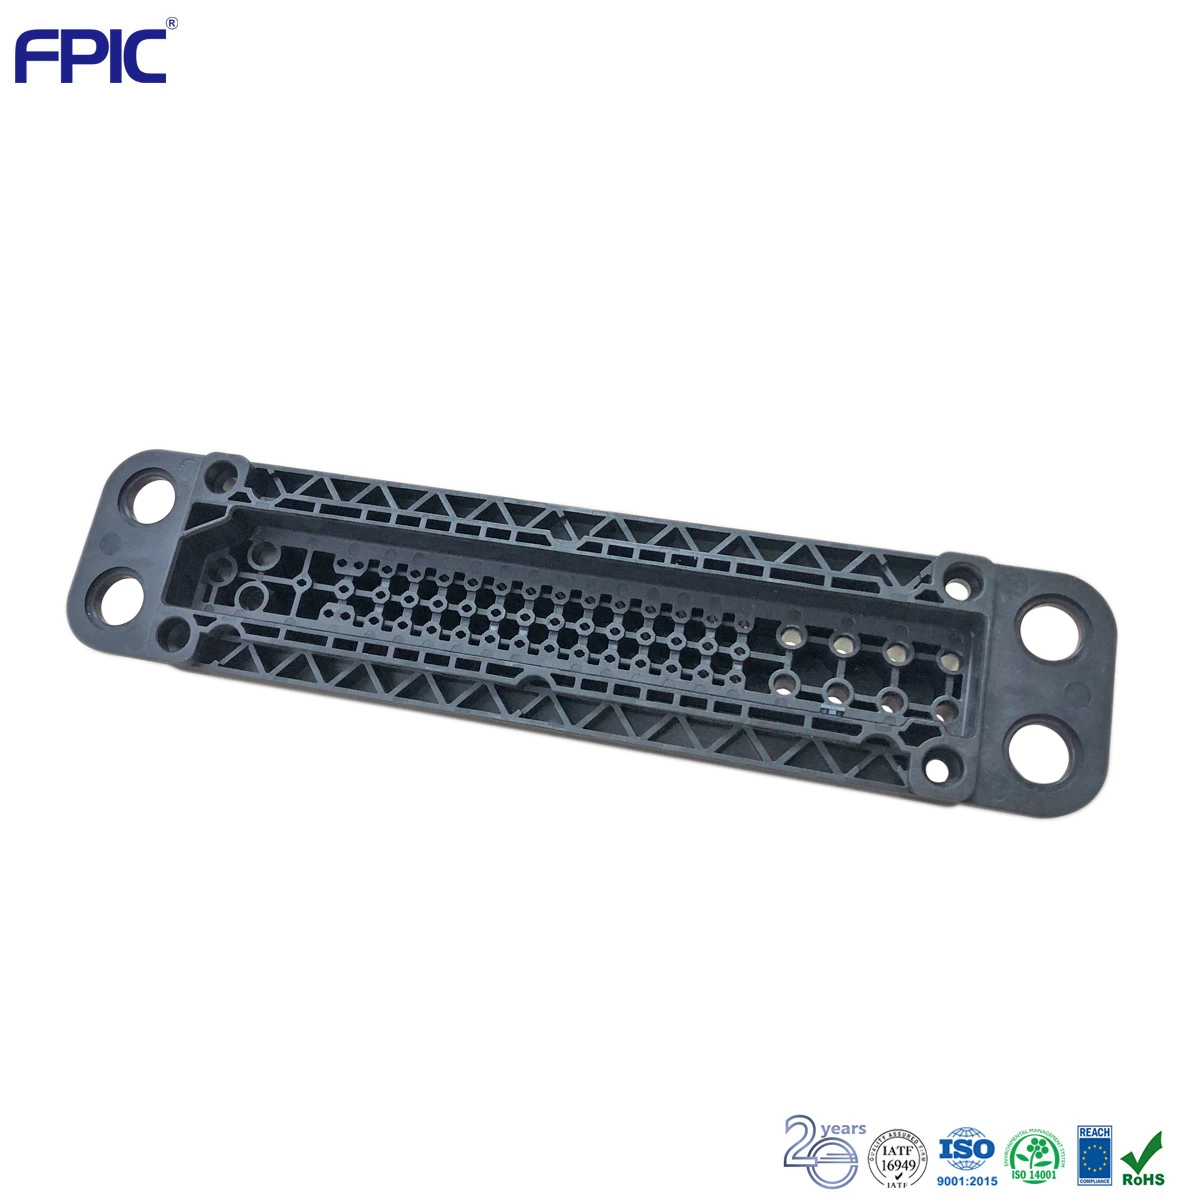 Fpic Plastic Electronic Enclosure Customized Injection Molding ABS Products